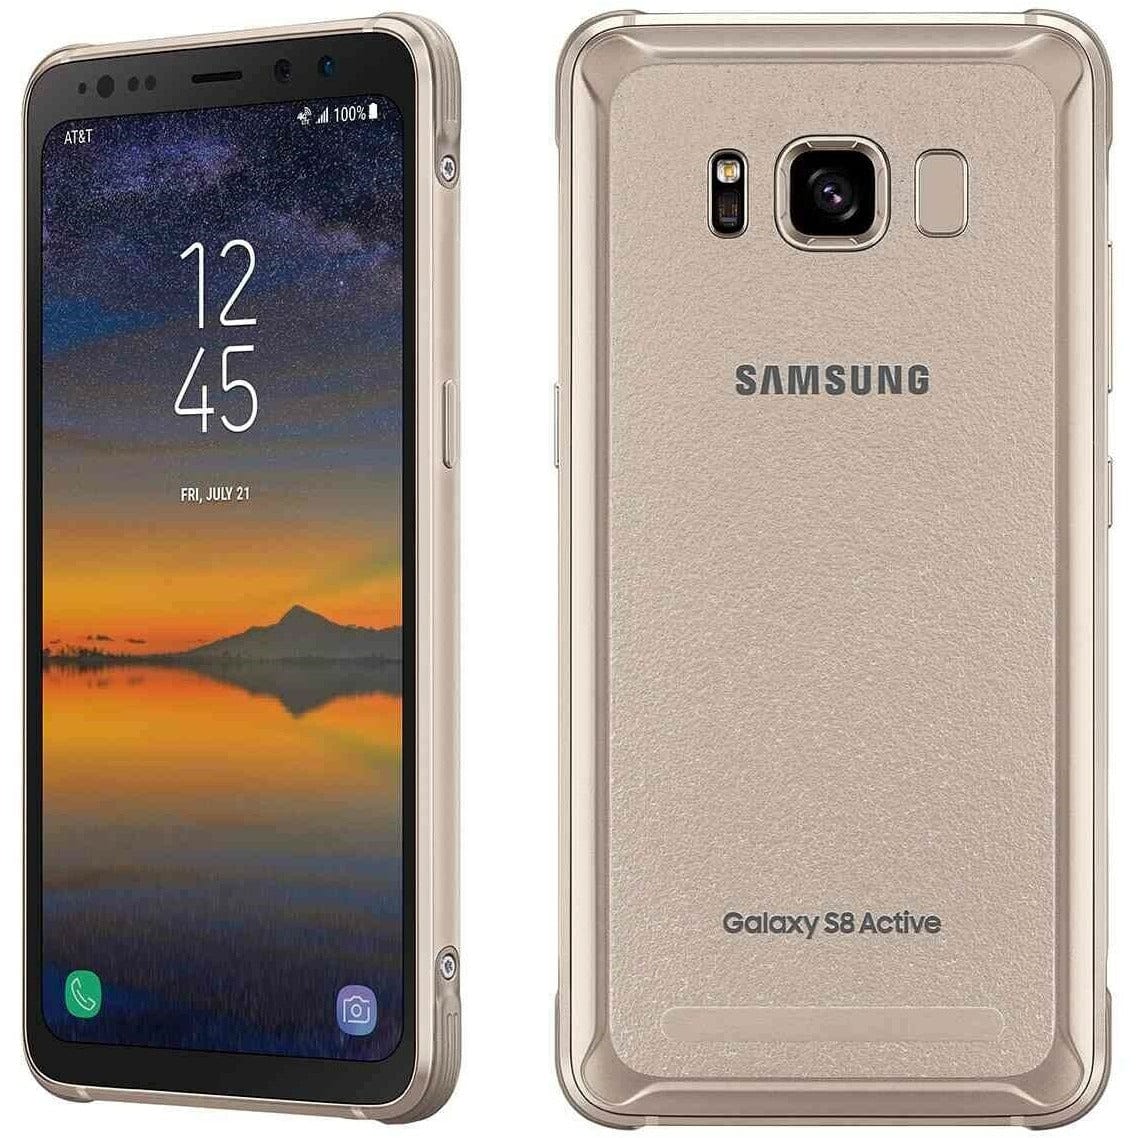 Samsung Galaxy S8 Active 64GB AT&T Locked Cell-Phone w- 12MP Camera -